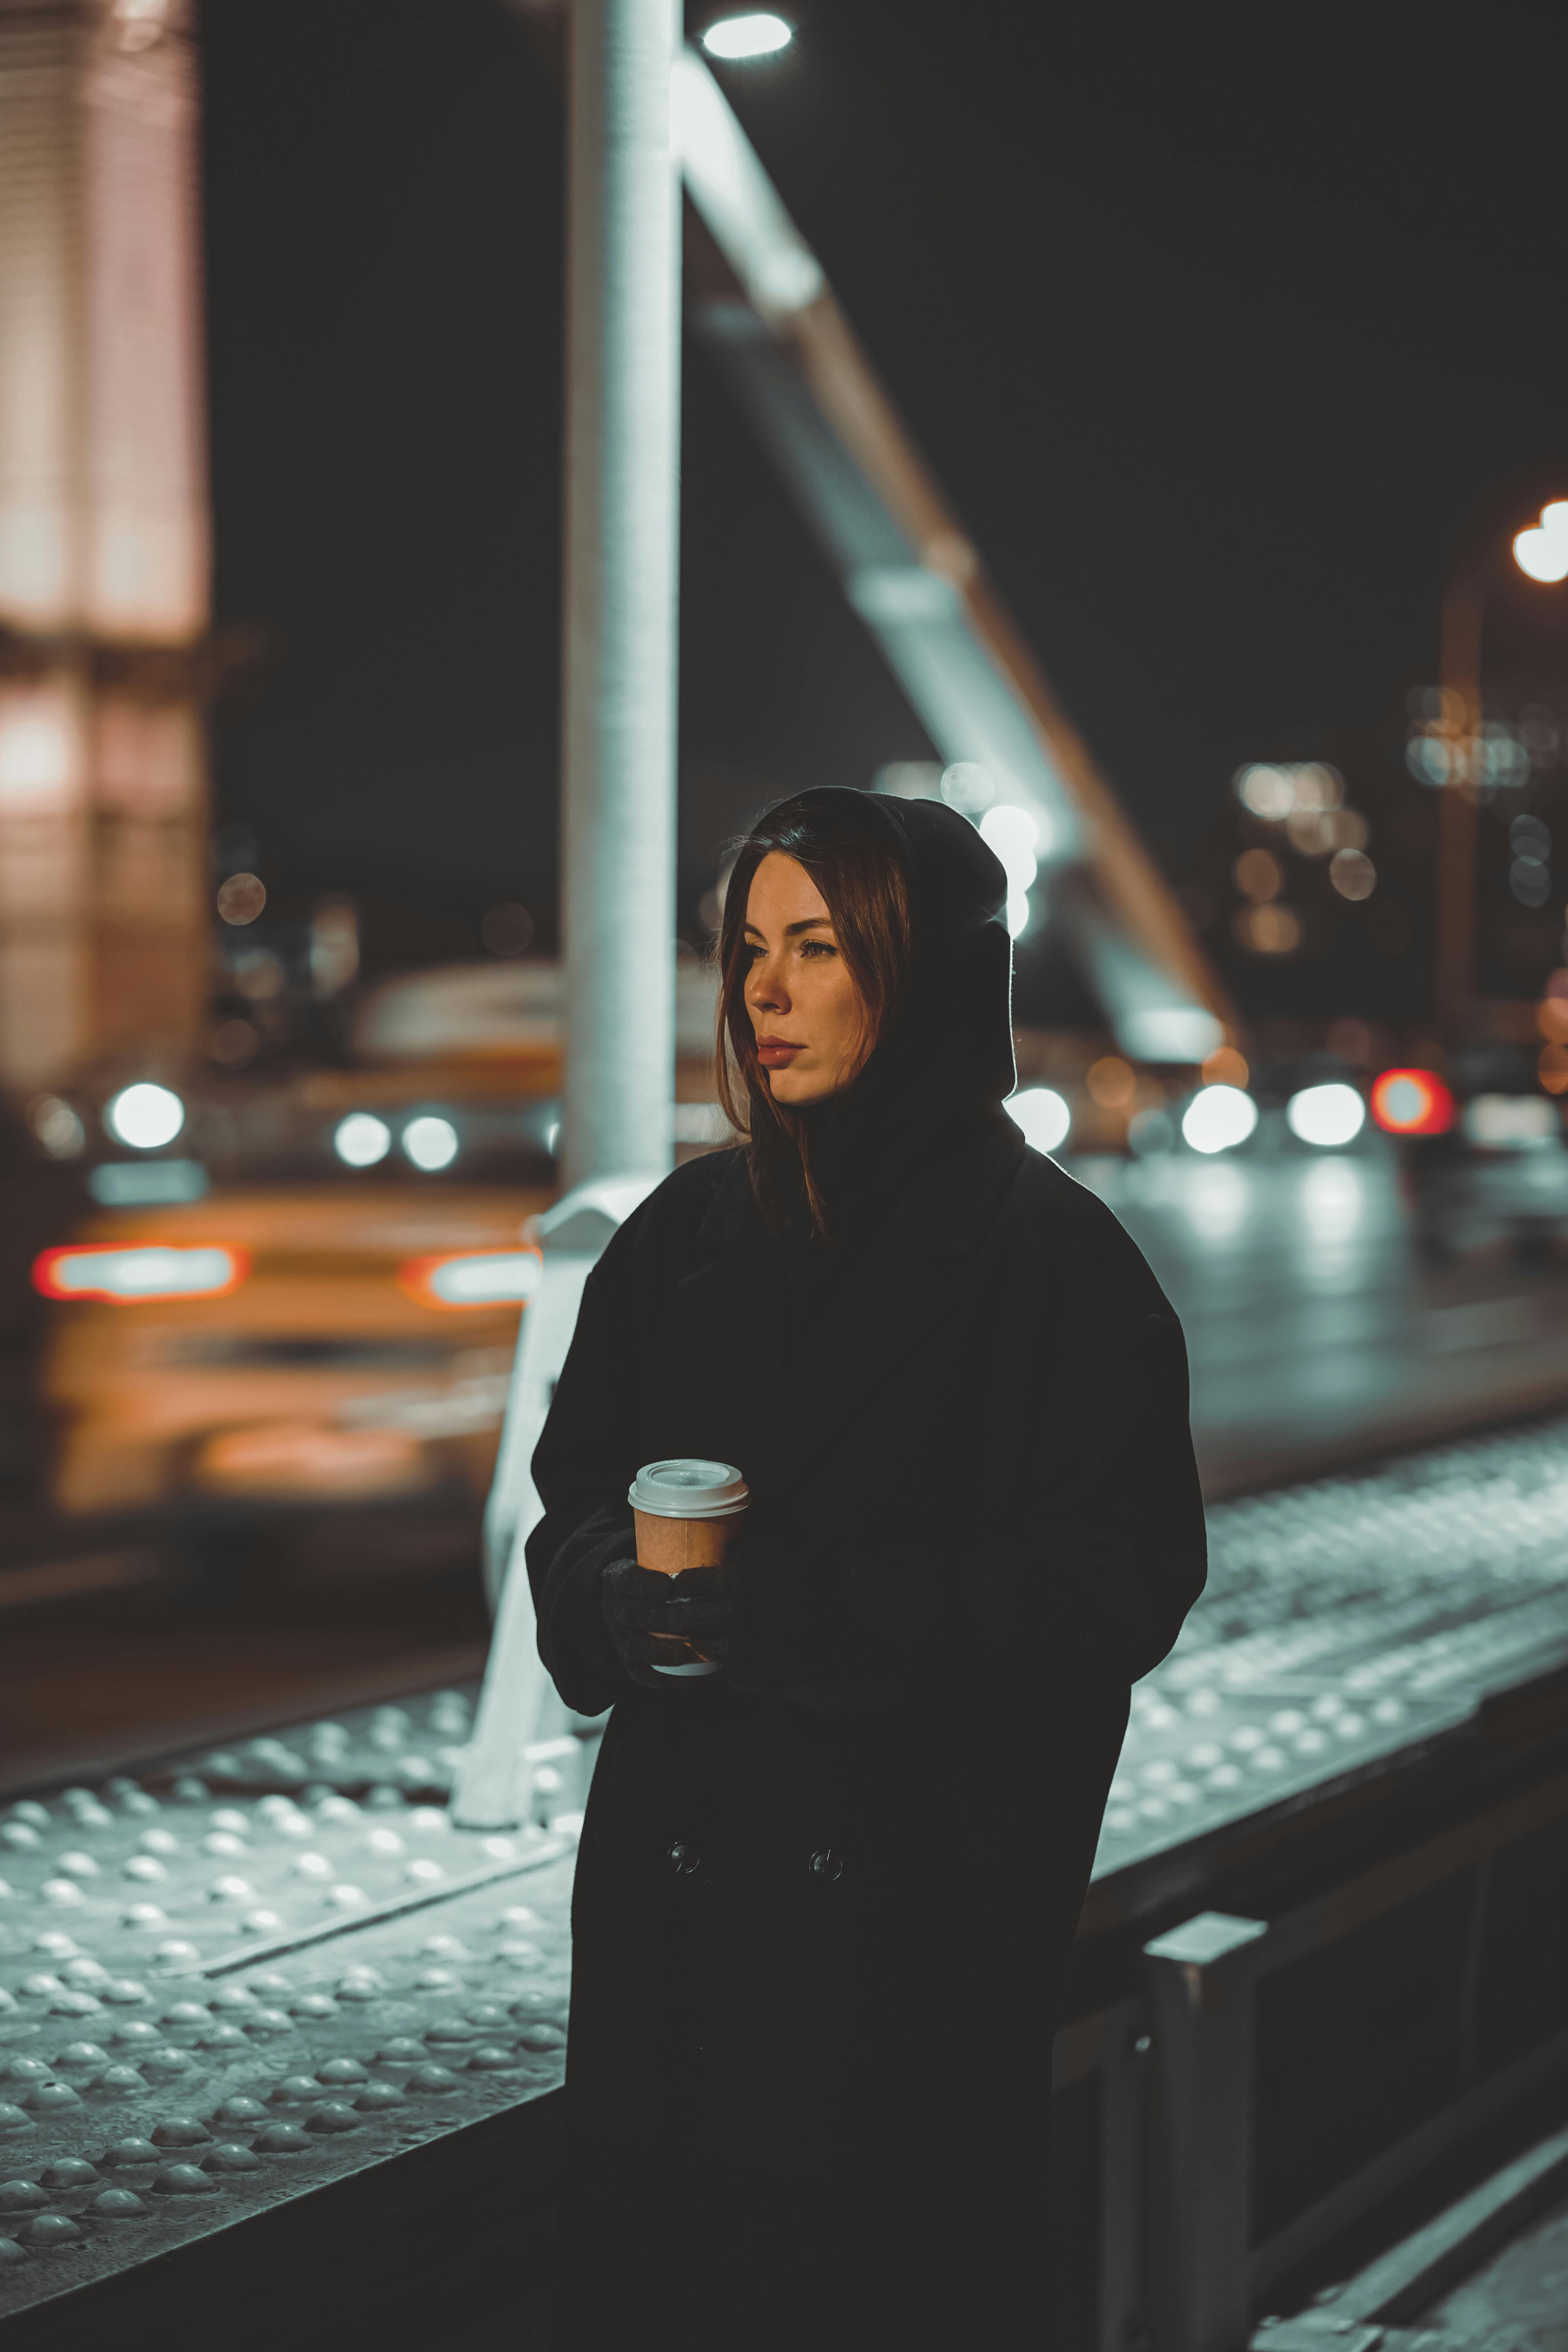 hooded woman waiting outdoors at night